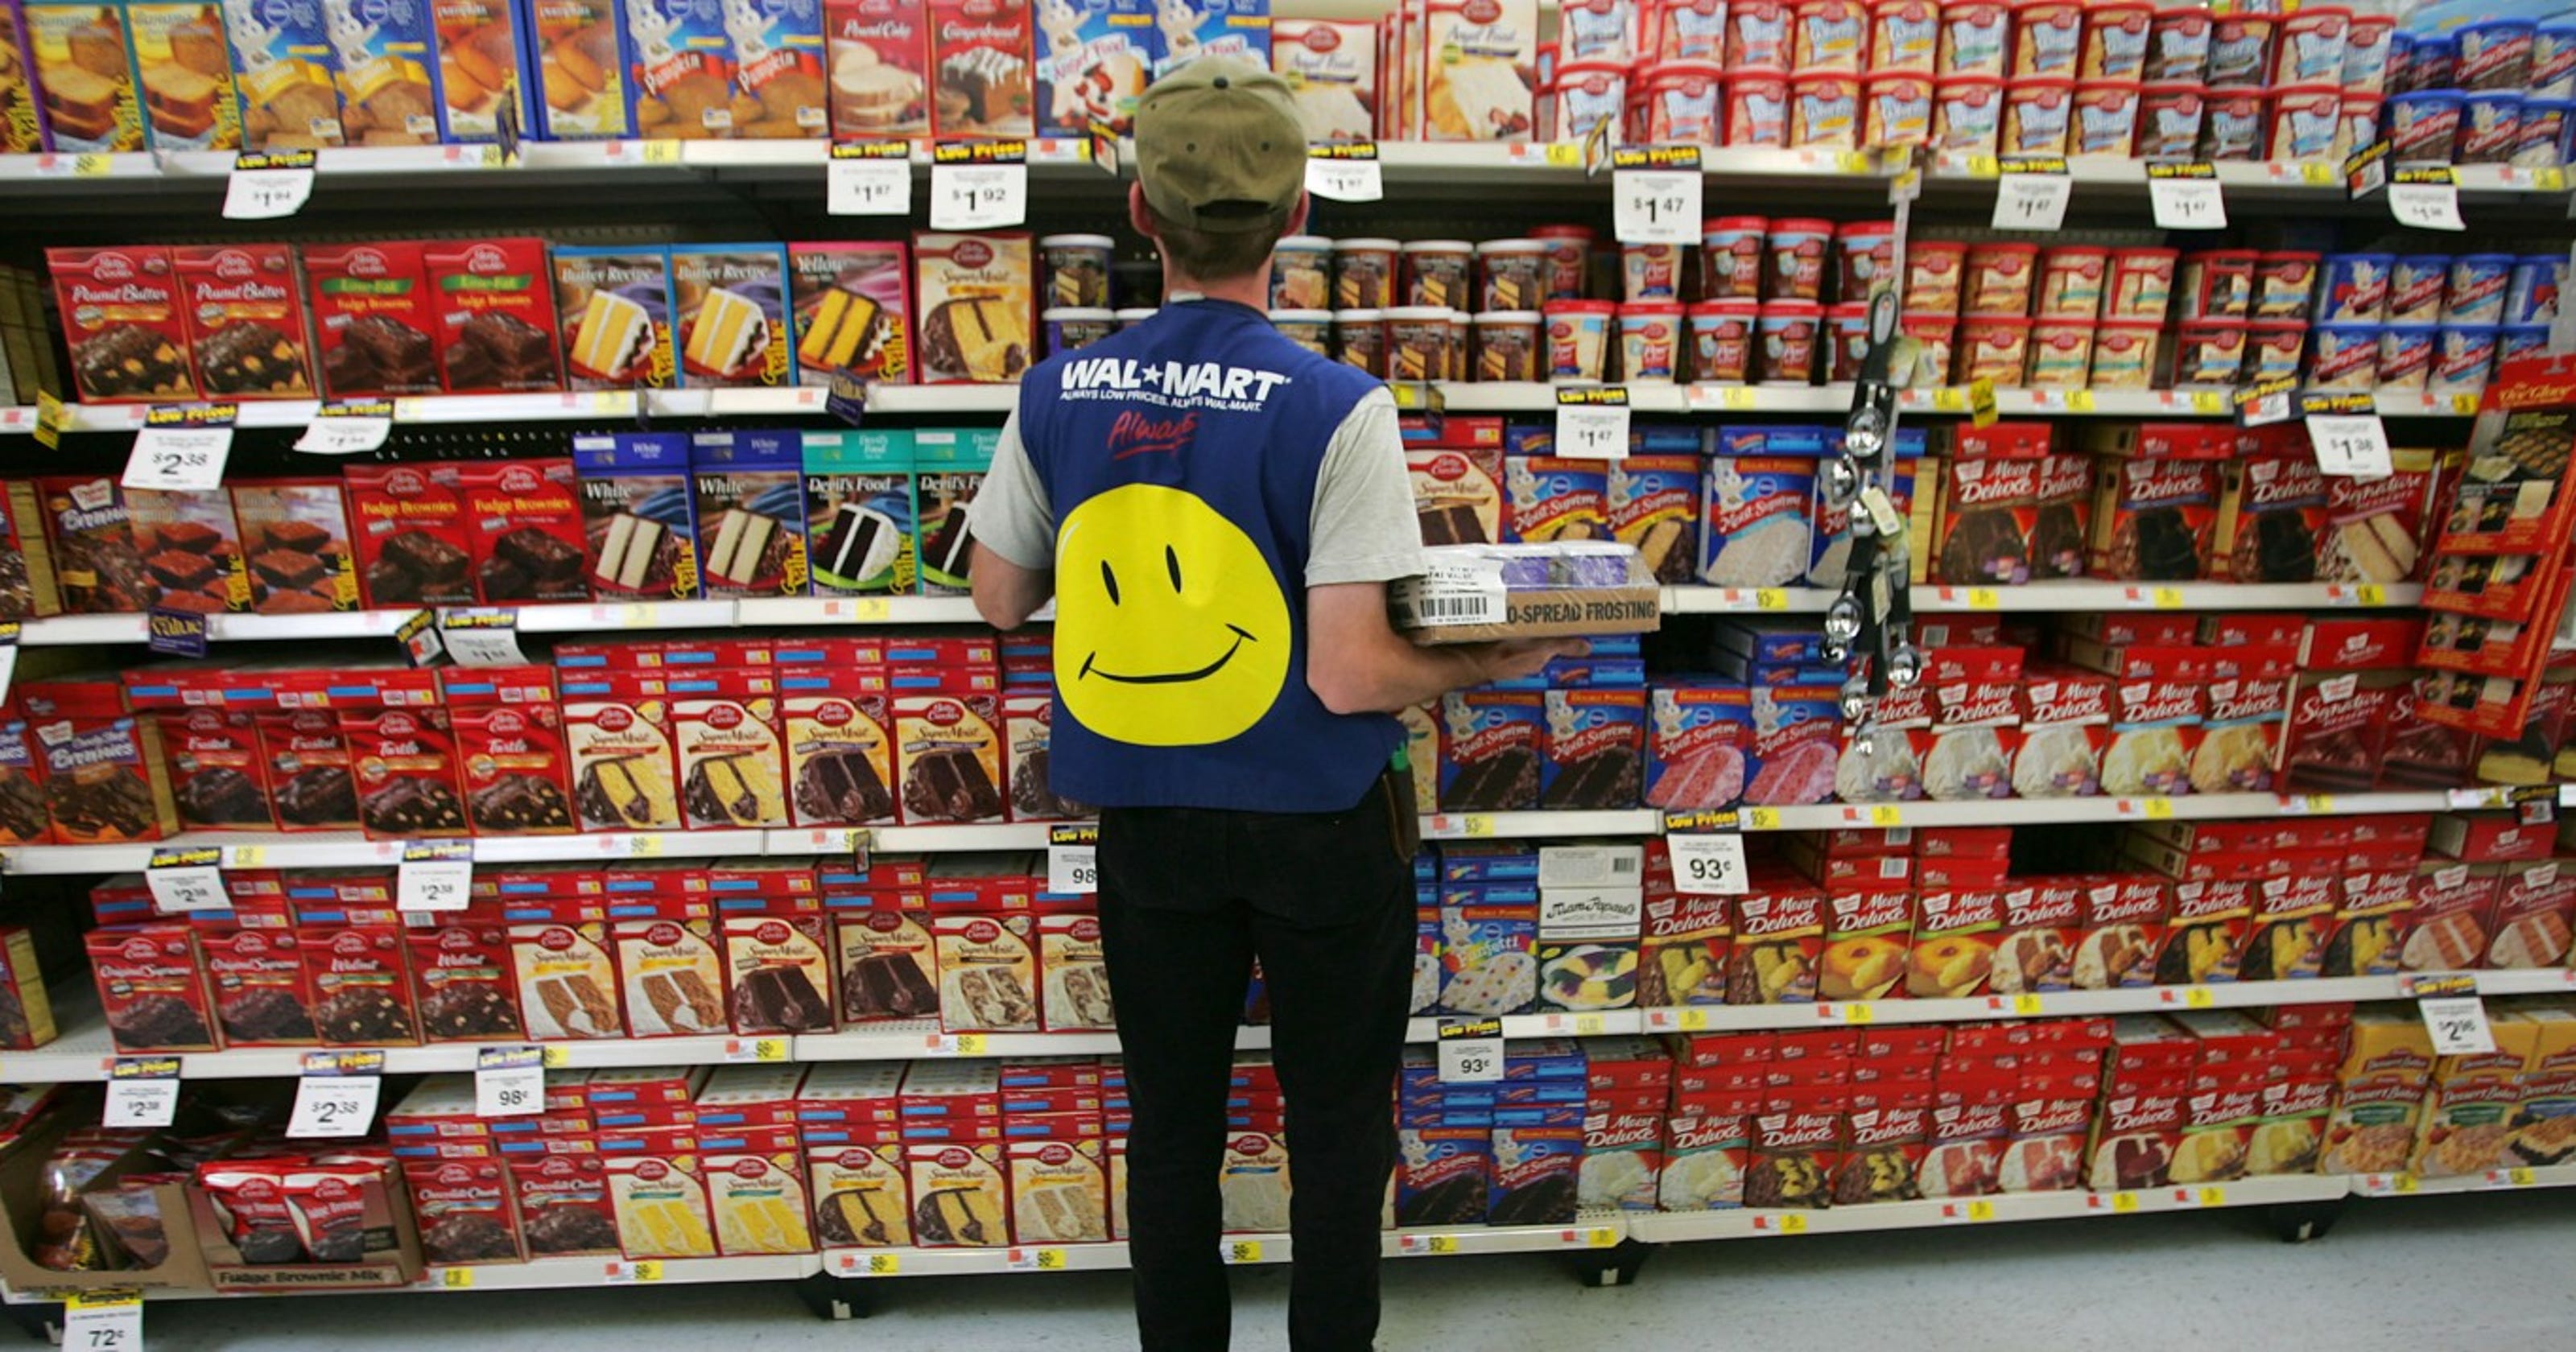 Walmart workers can now earn paid time-off for sick days